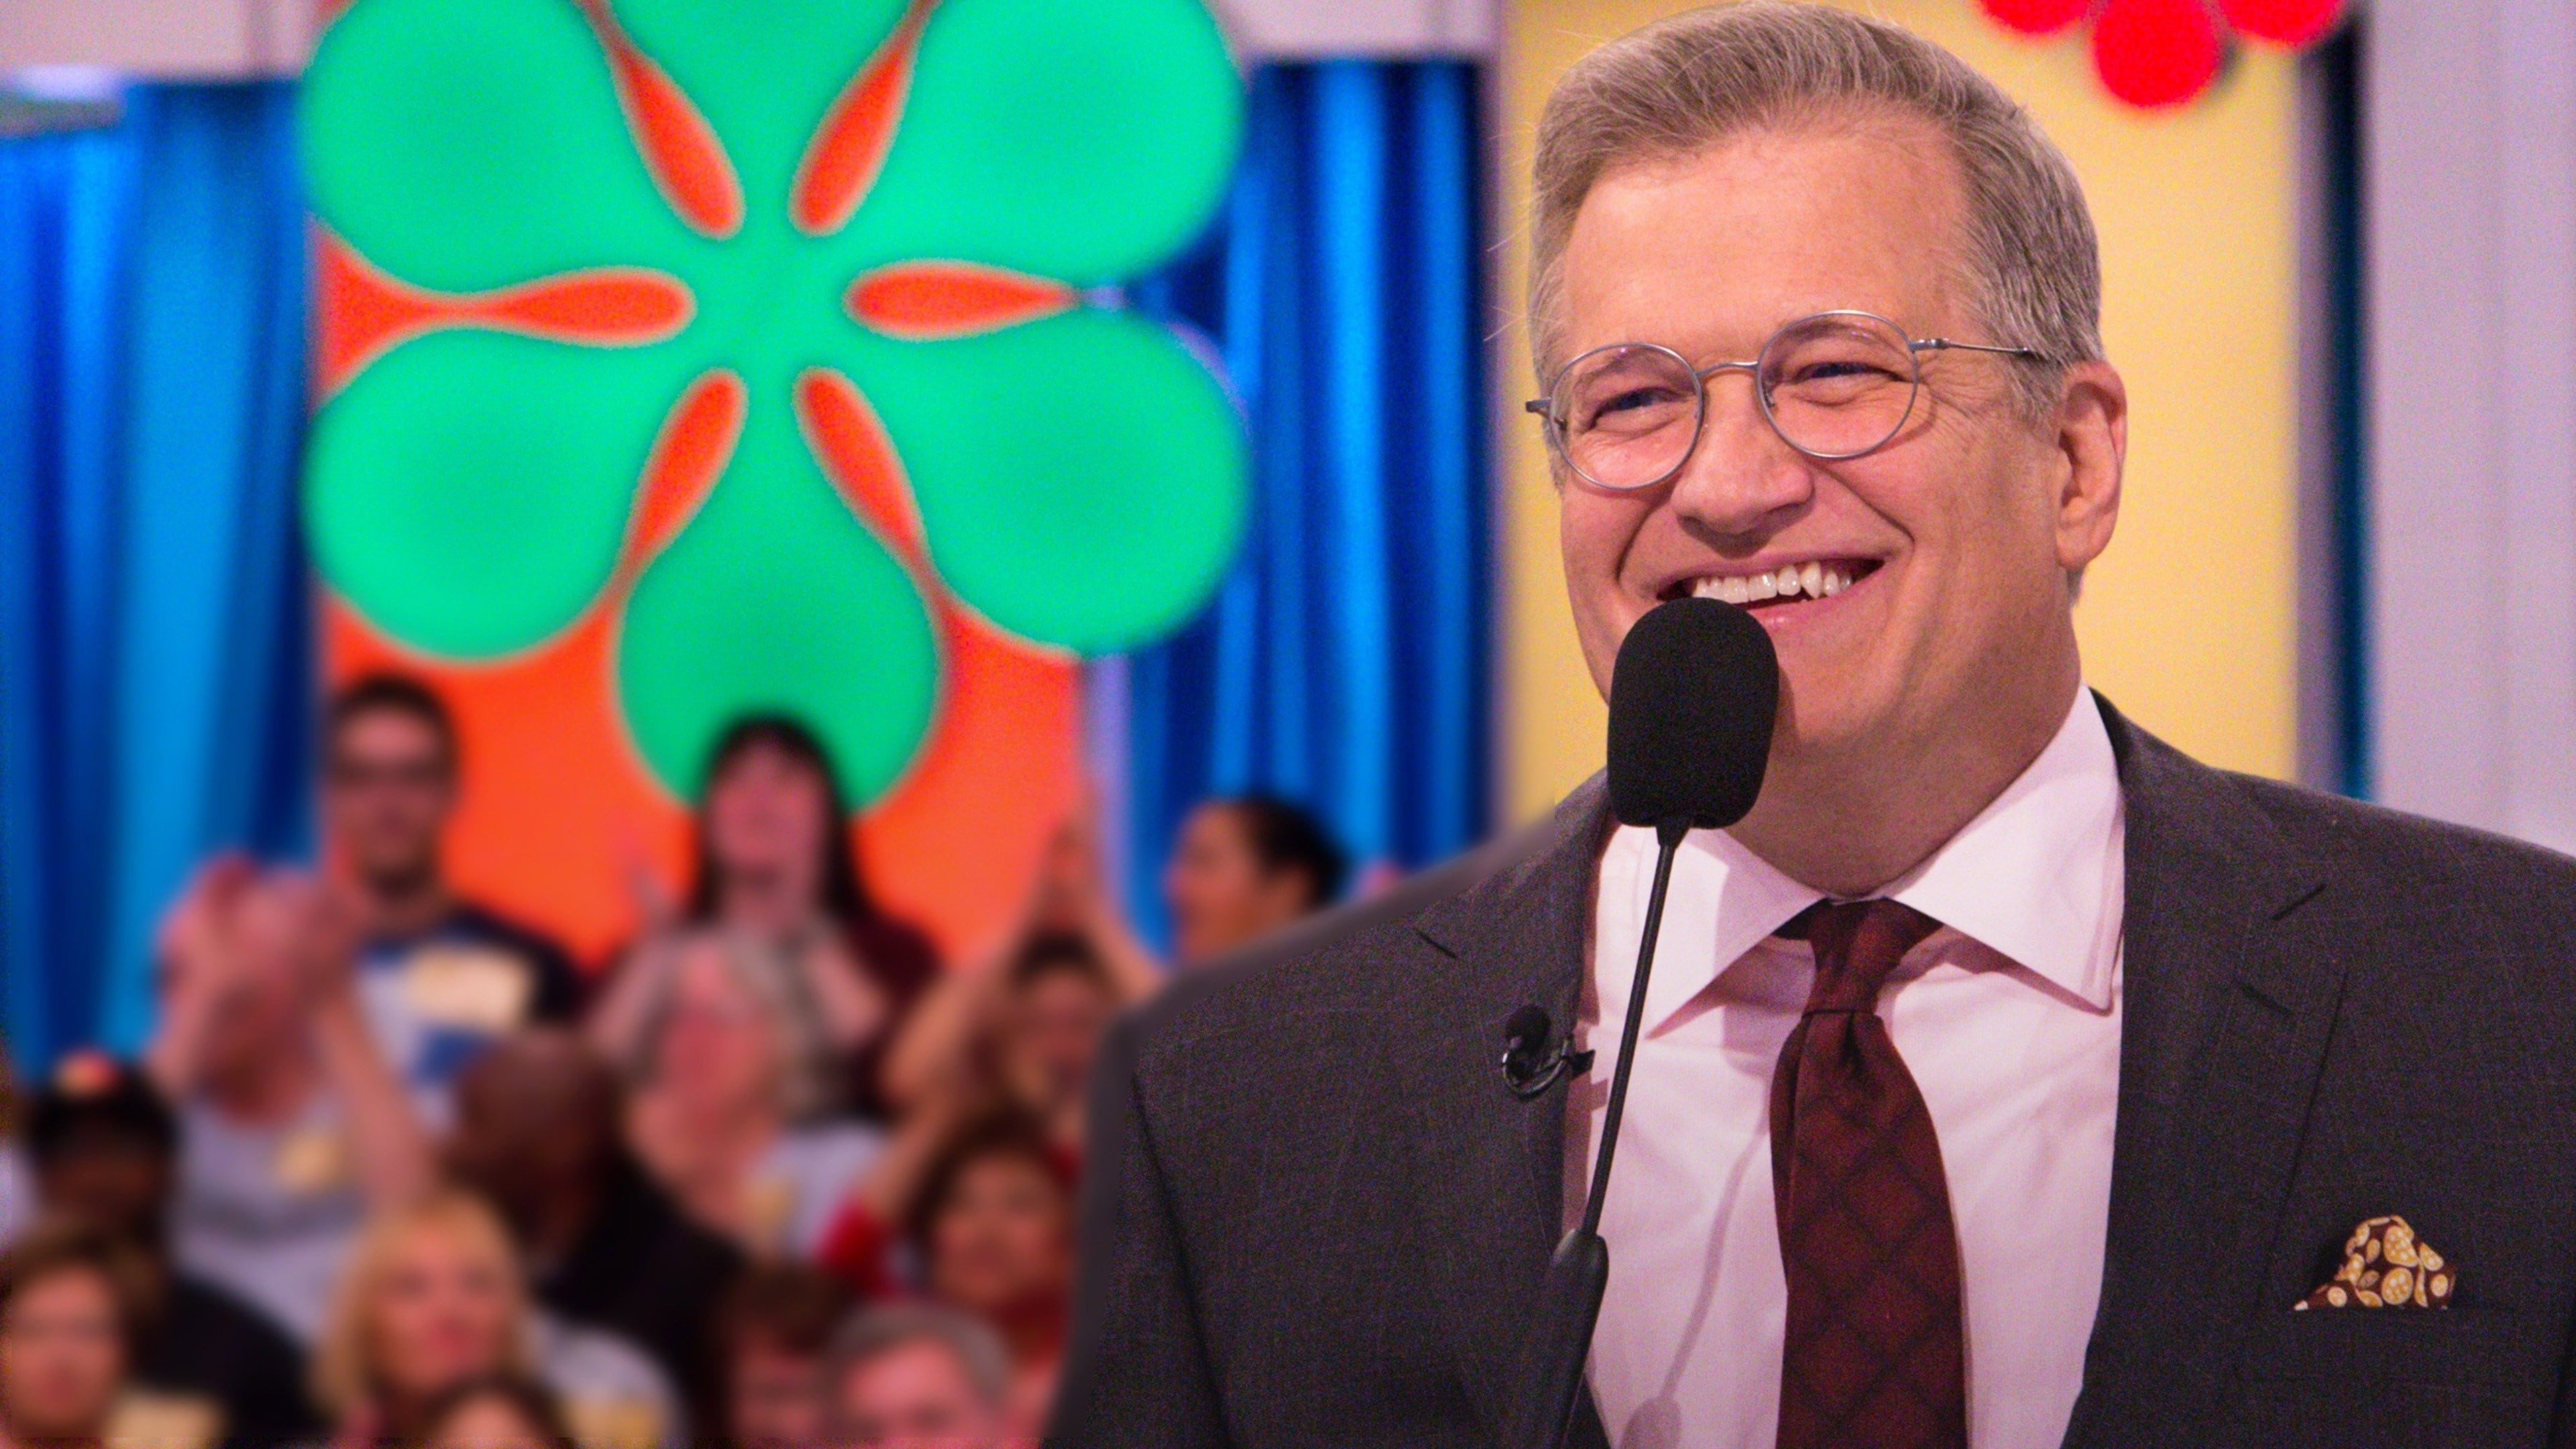 The Price Is Right - Season 1 Episode 229 : The Price Is Right Season 1 Episode 229